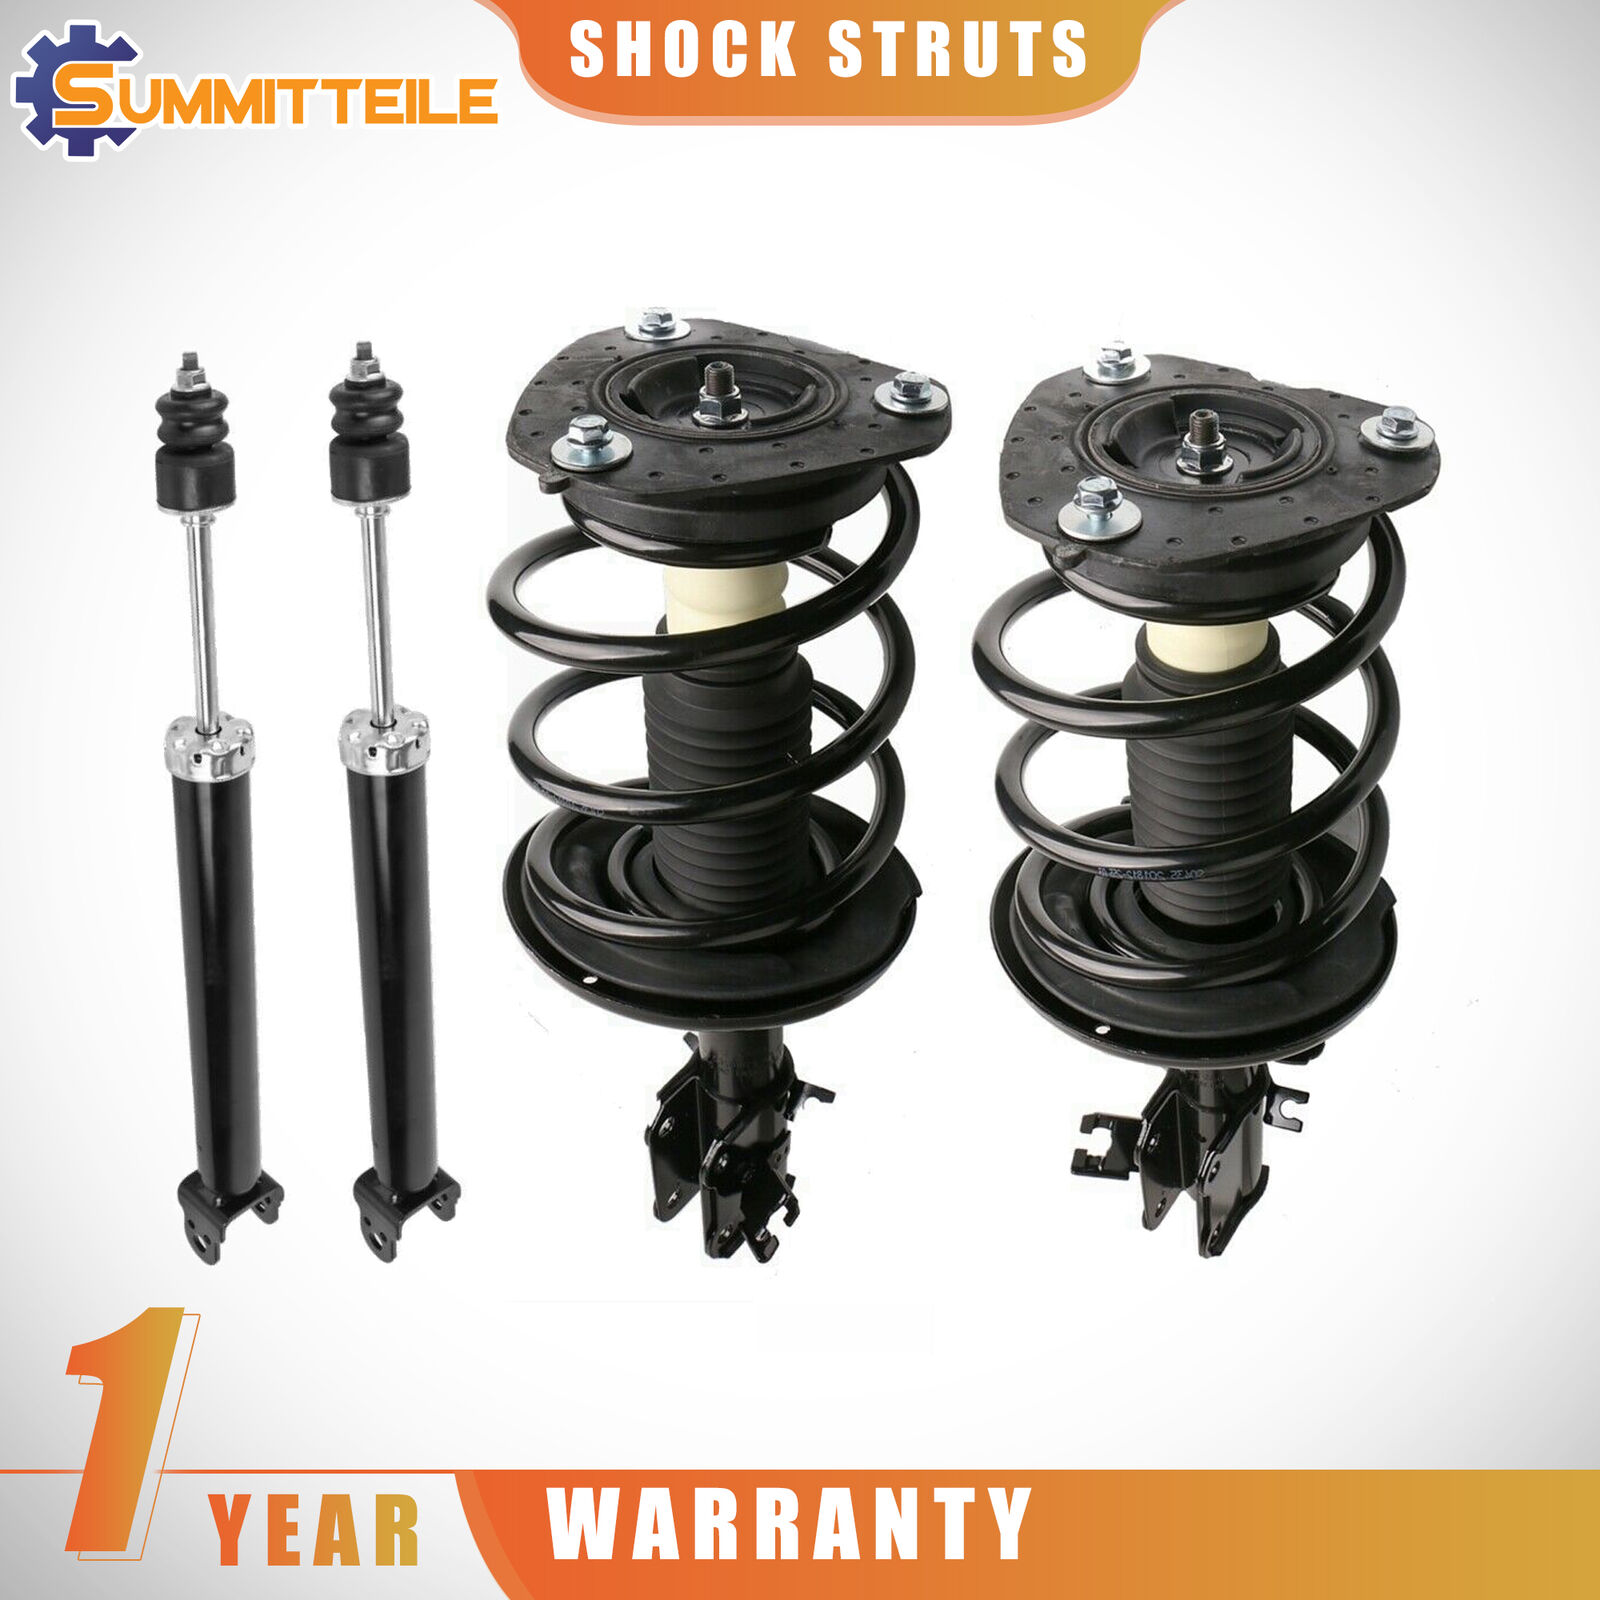 4PCS Complete Front Strut Rear Shock Absorbers For 2007-2012 Nissan Altima 4cyl